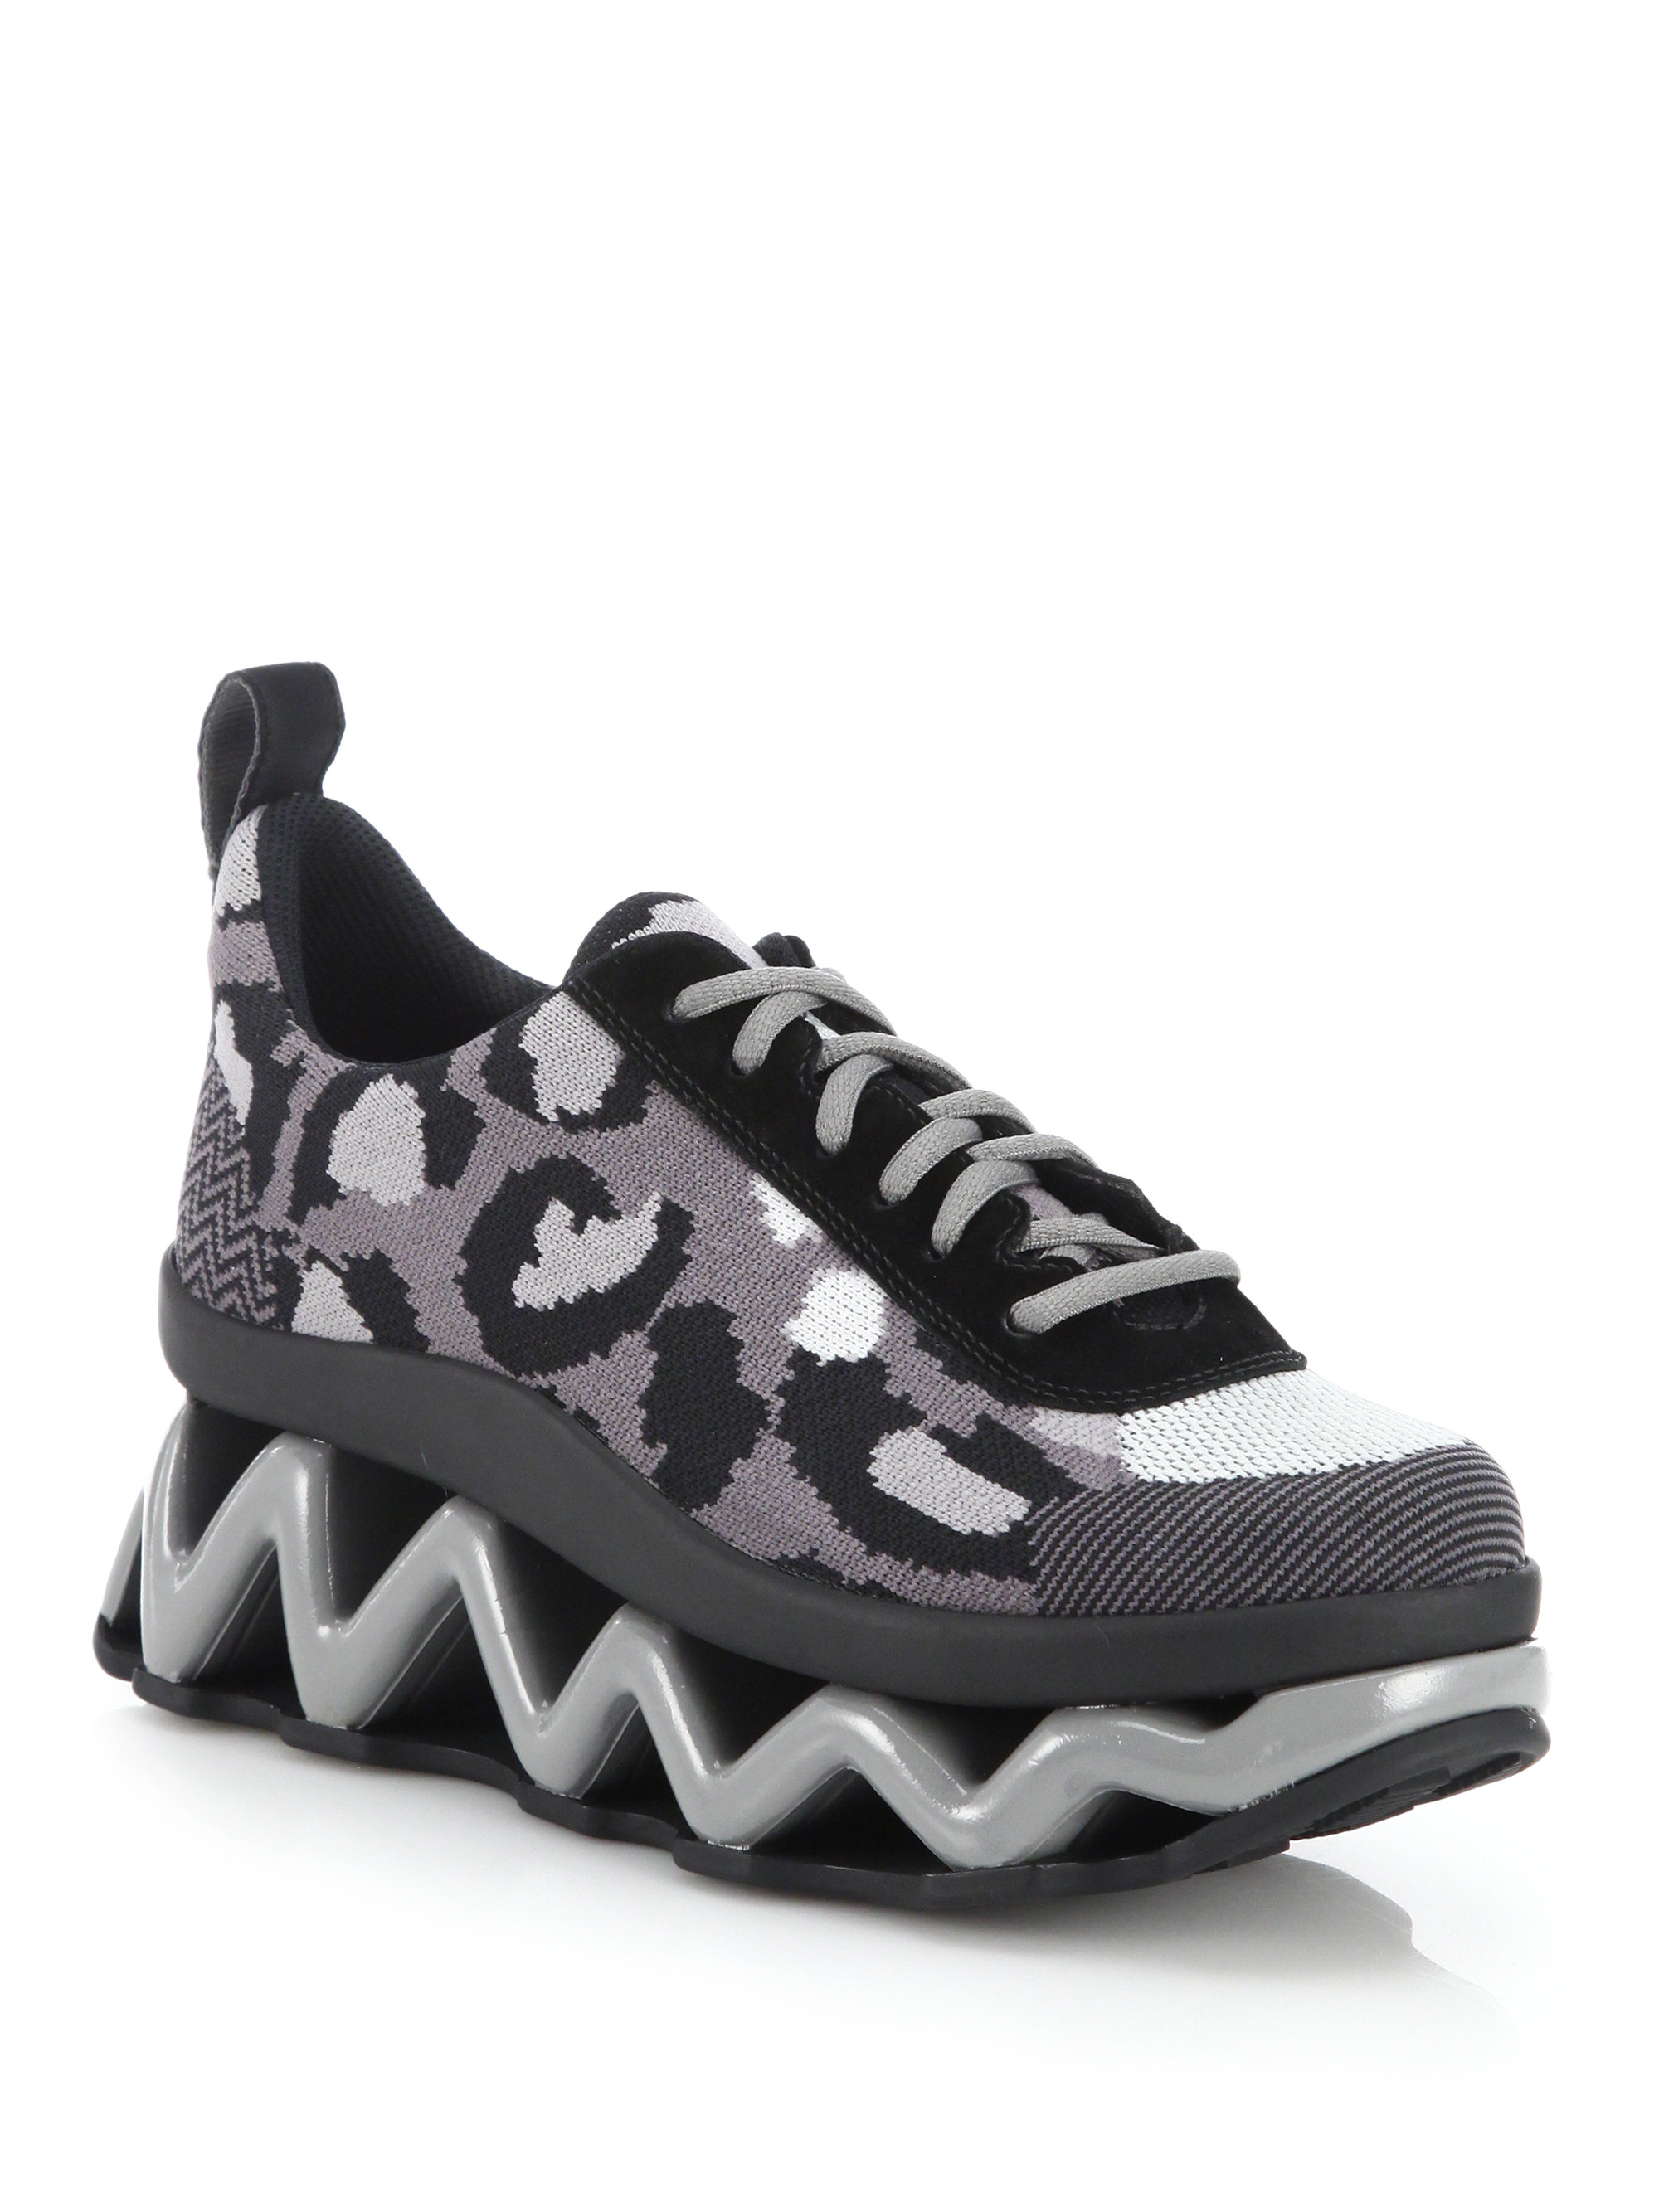 Marc By Marc Jacobs Ninja Wave Textile & Leather Platform Sneakers 